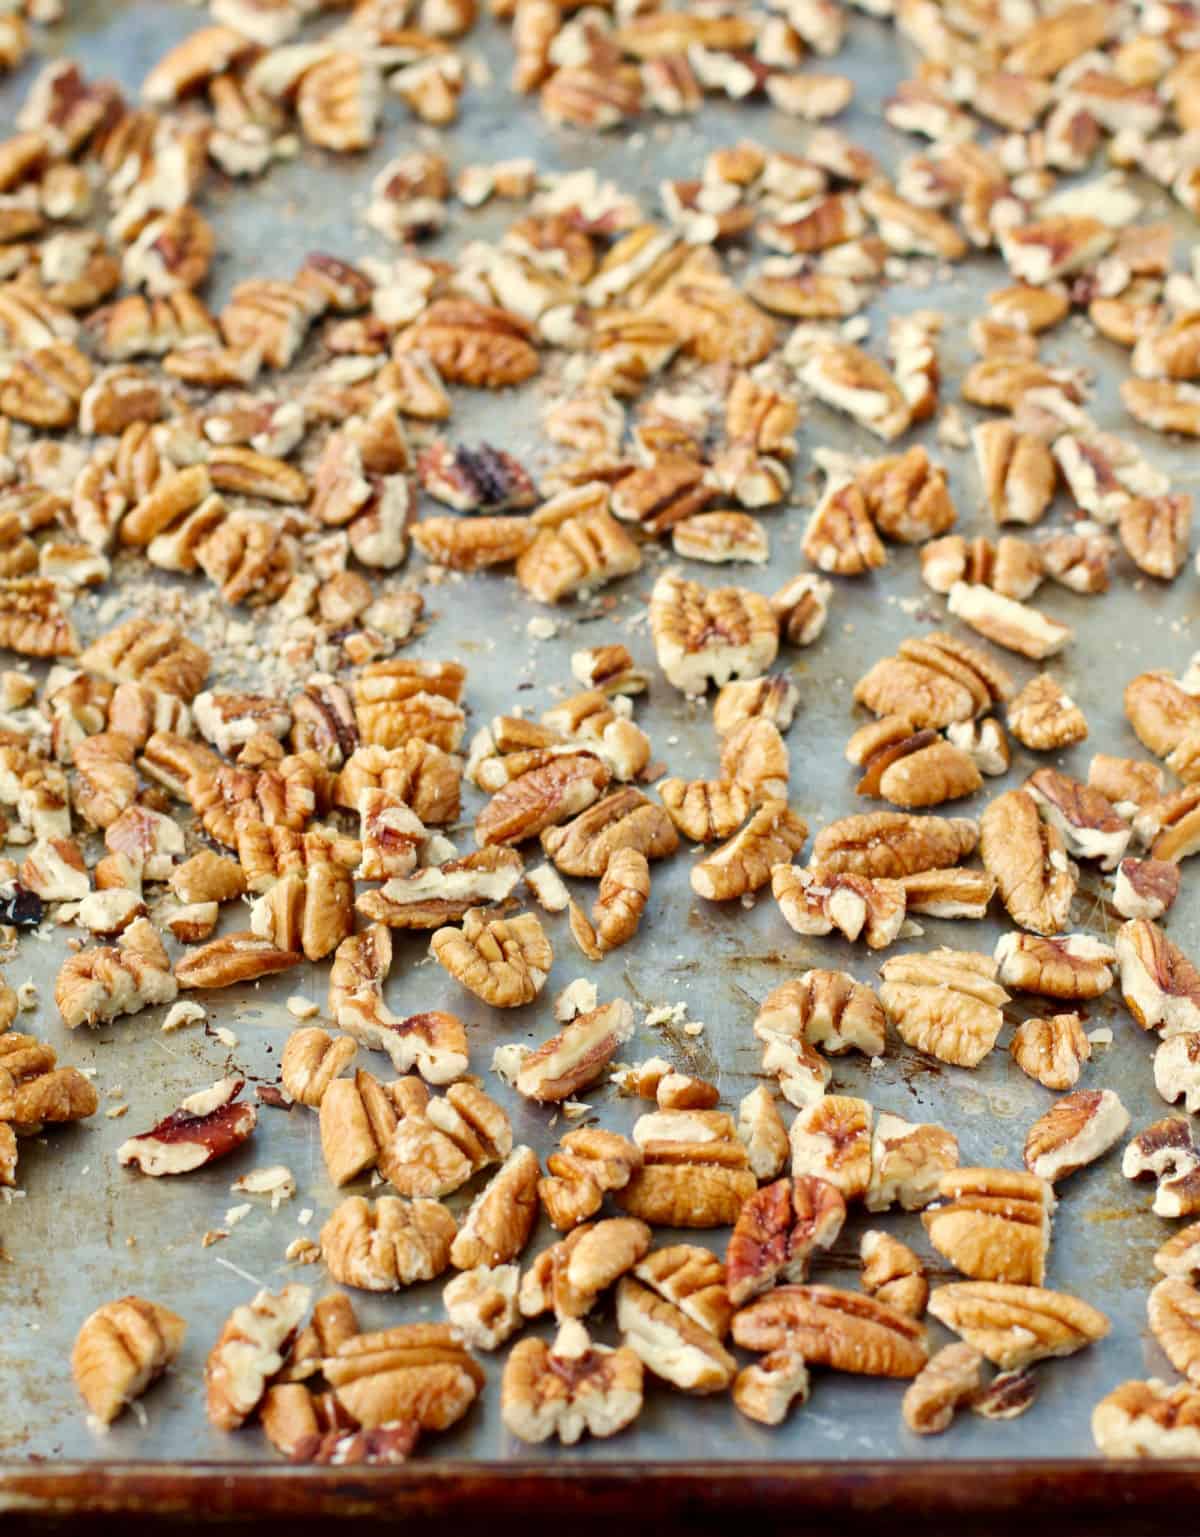 Pecan pieces on a rimmed baking sheet.